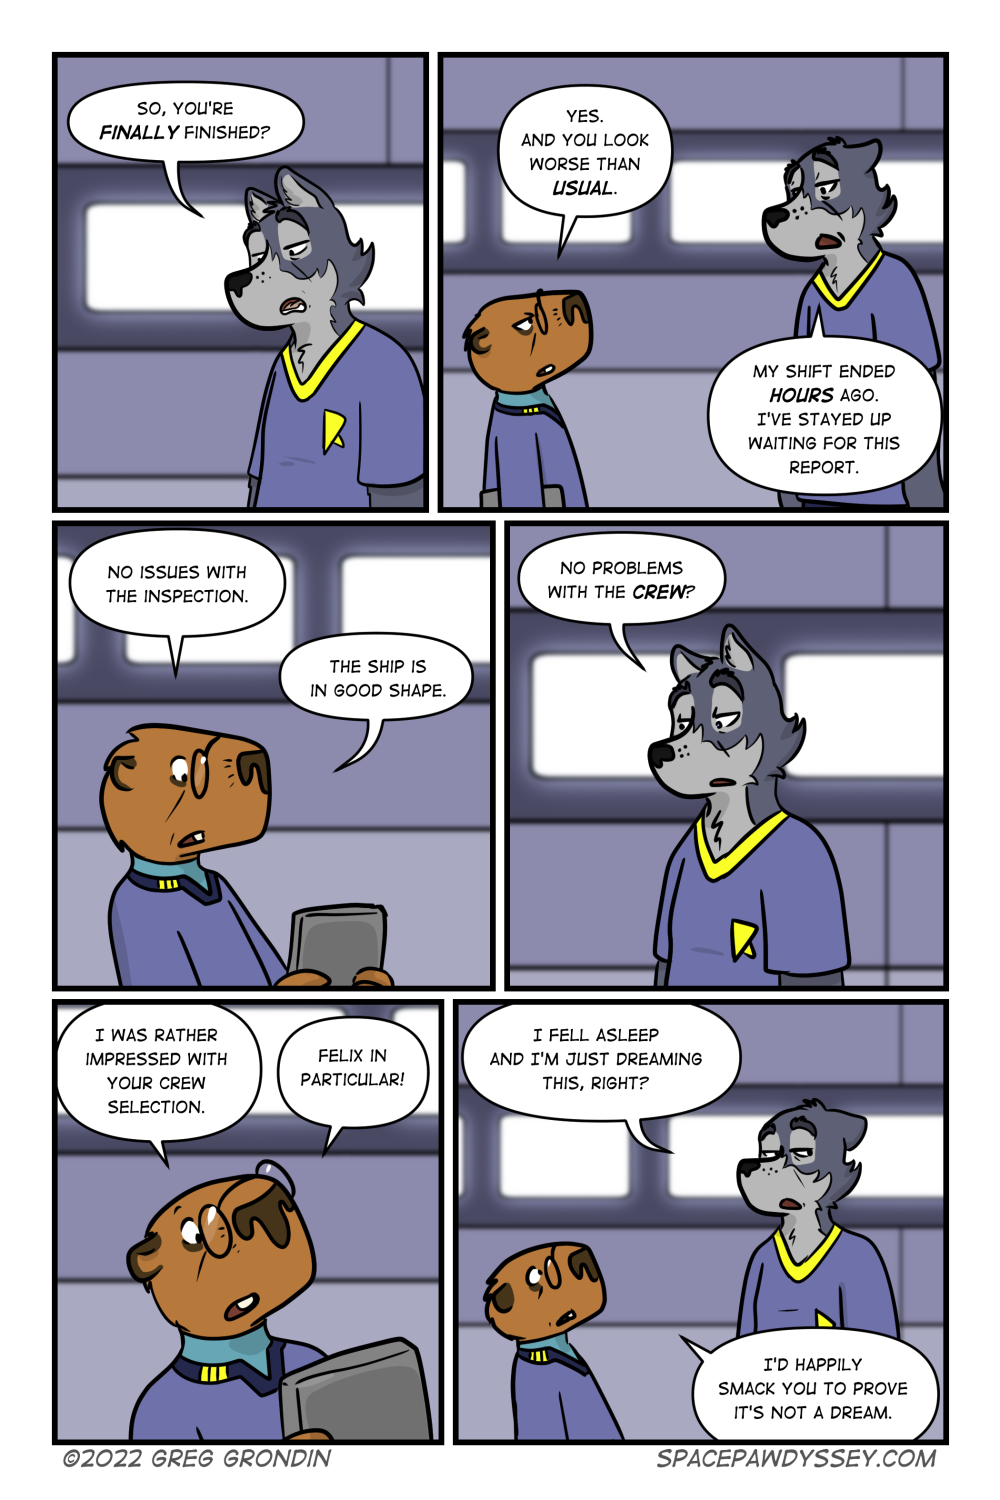 Space Pawdyssey #564